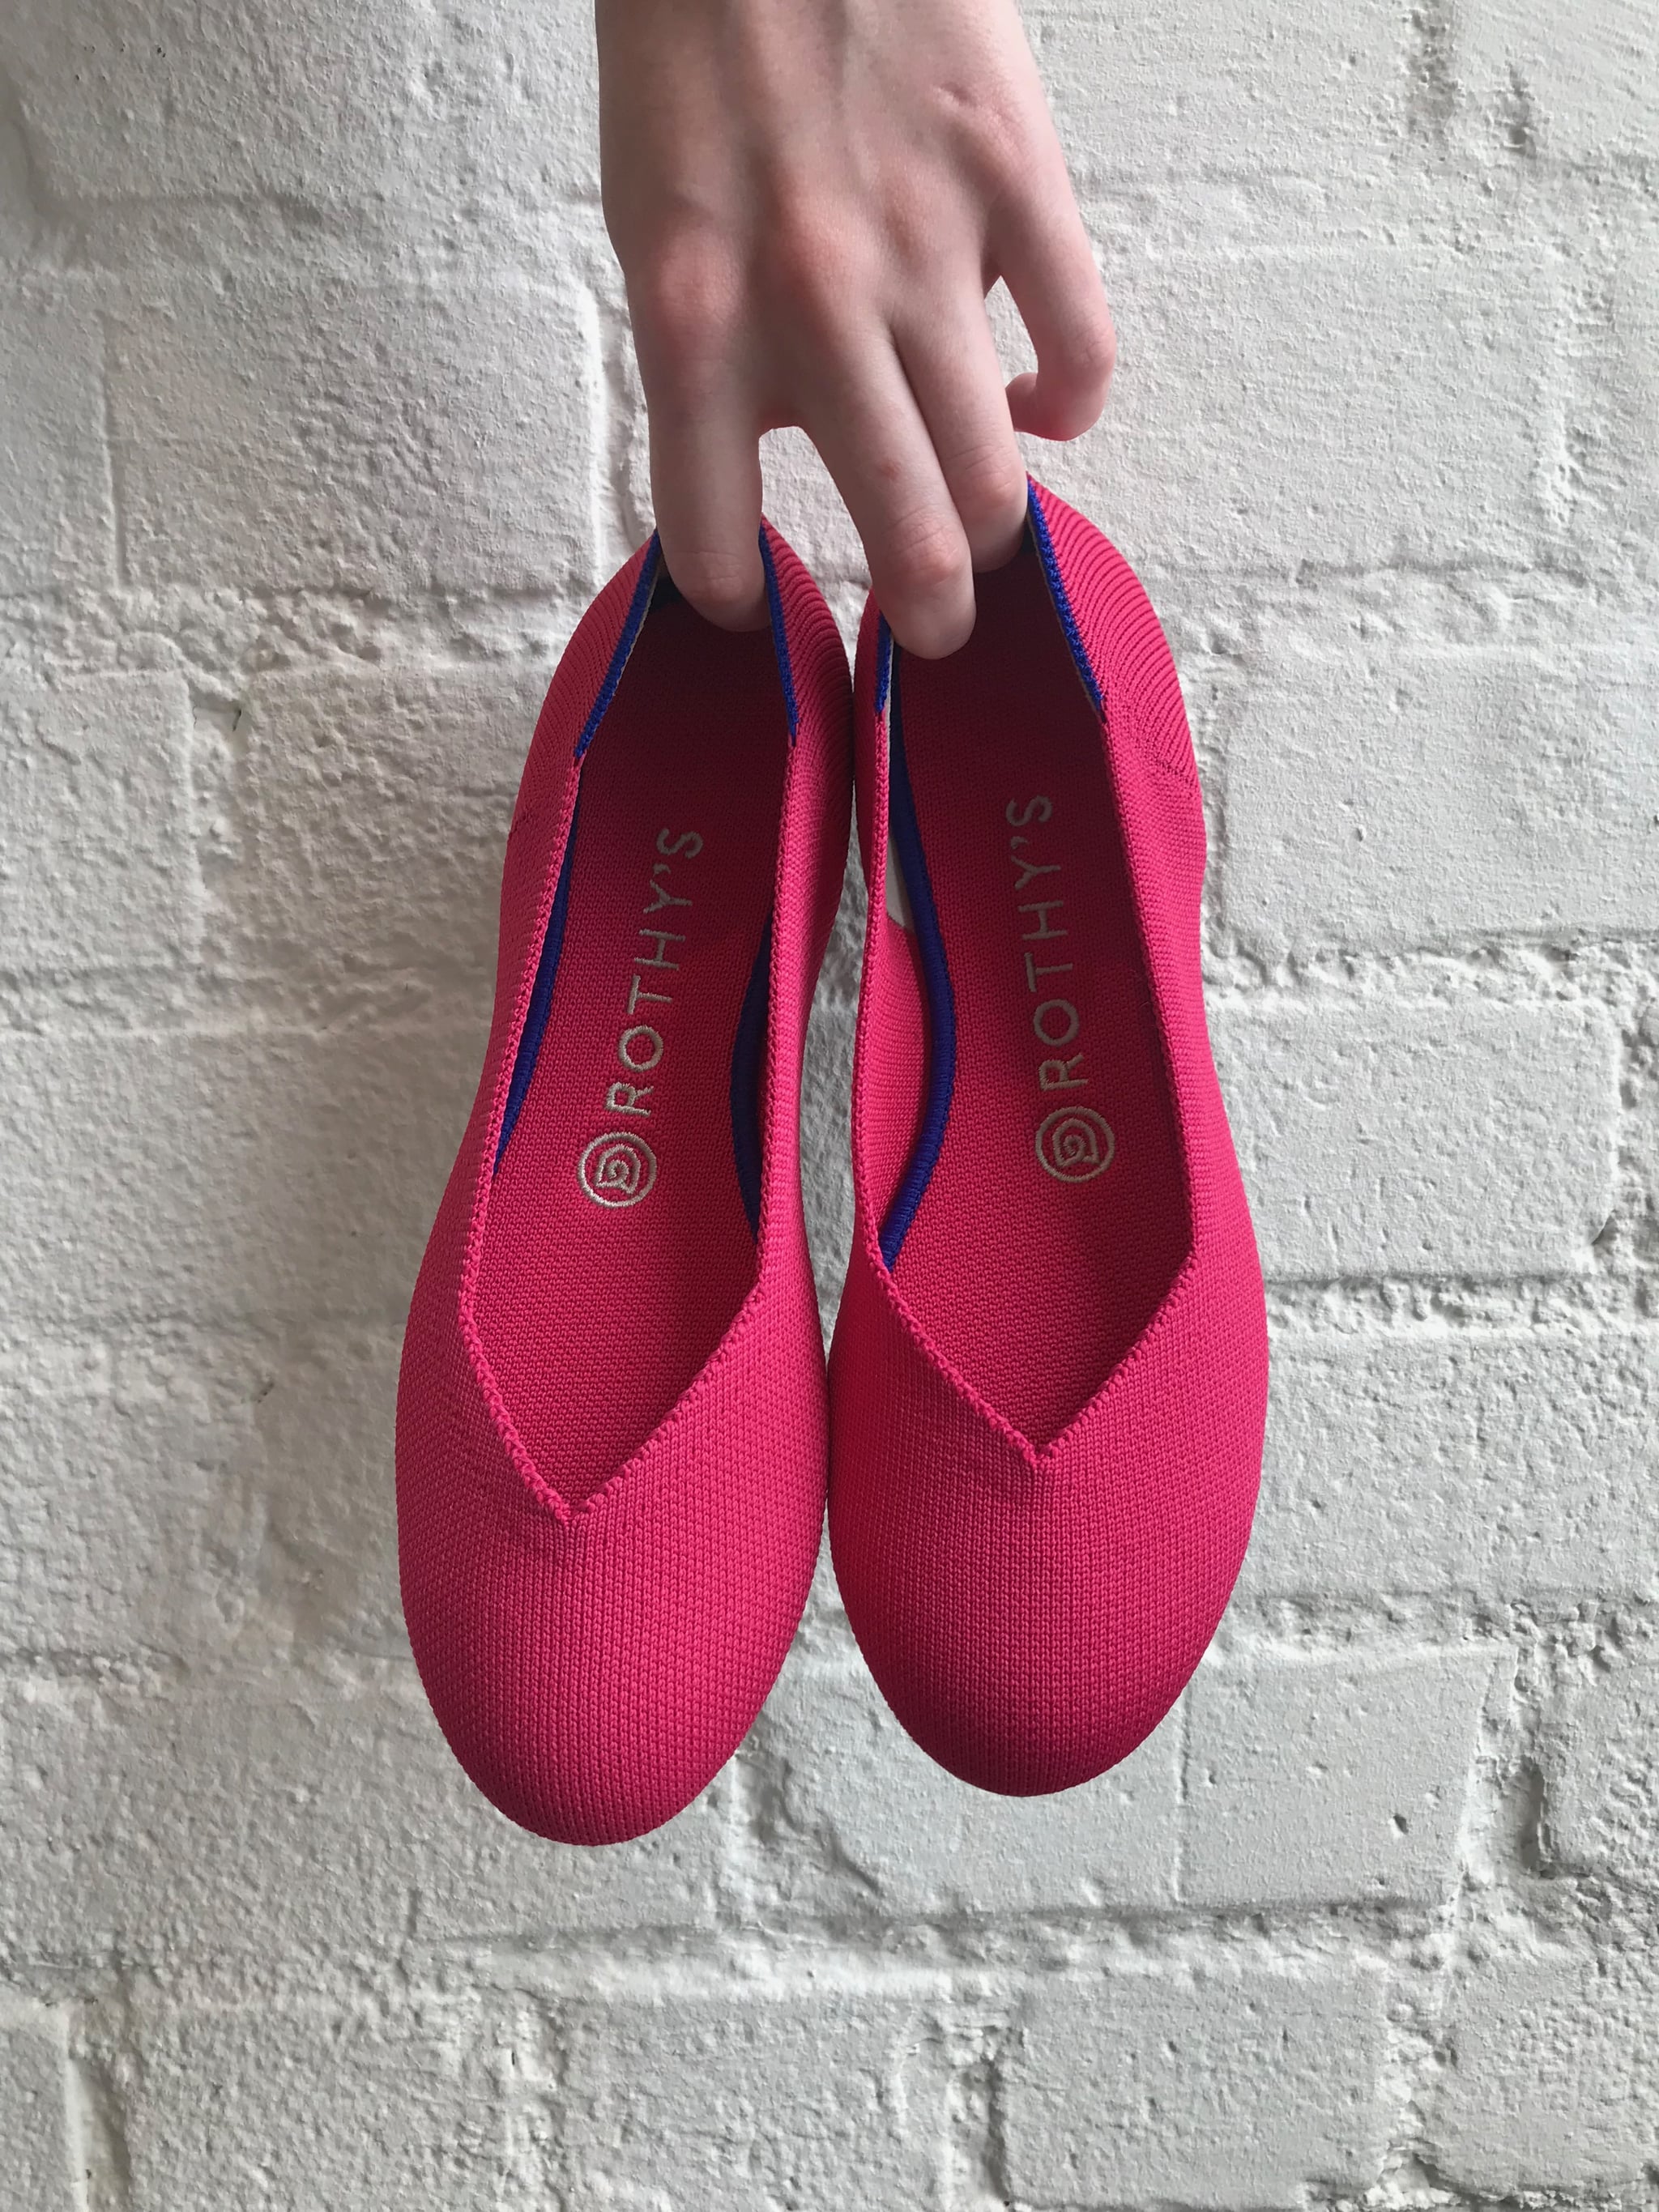 Rothy's Hot Pink Flat | Your Favorite 